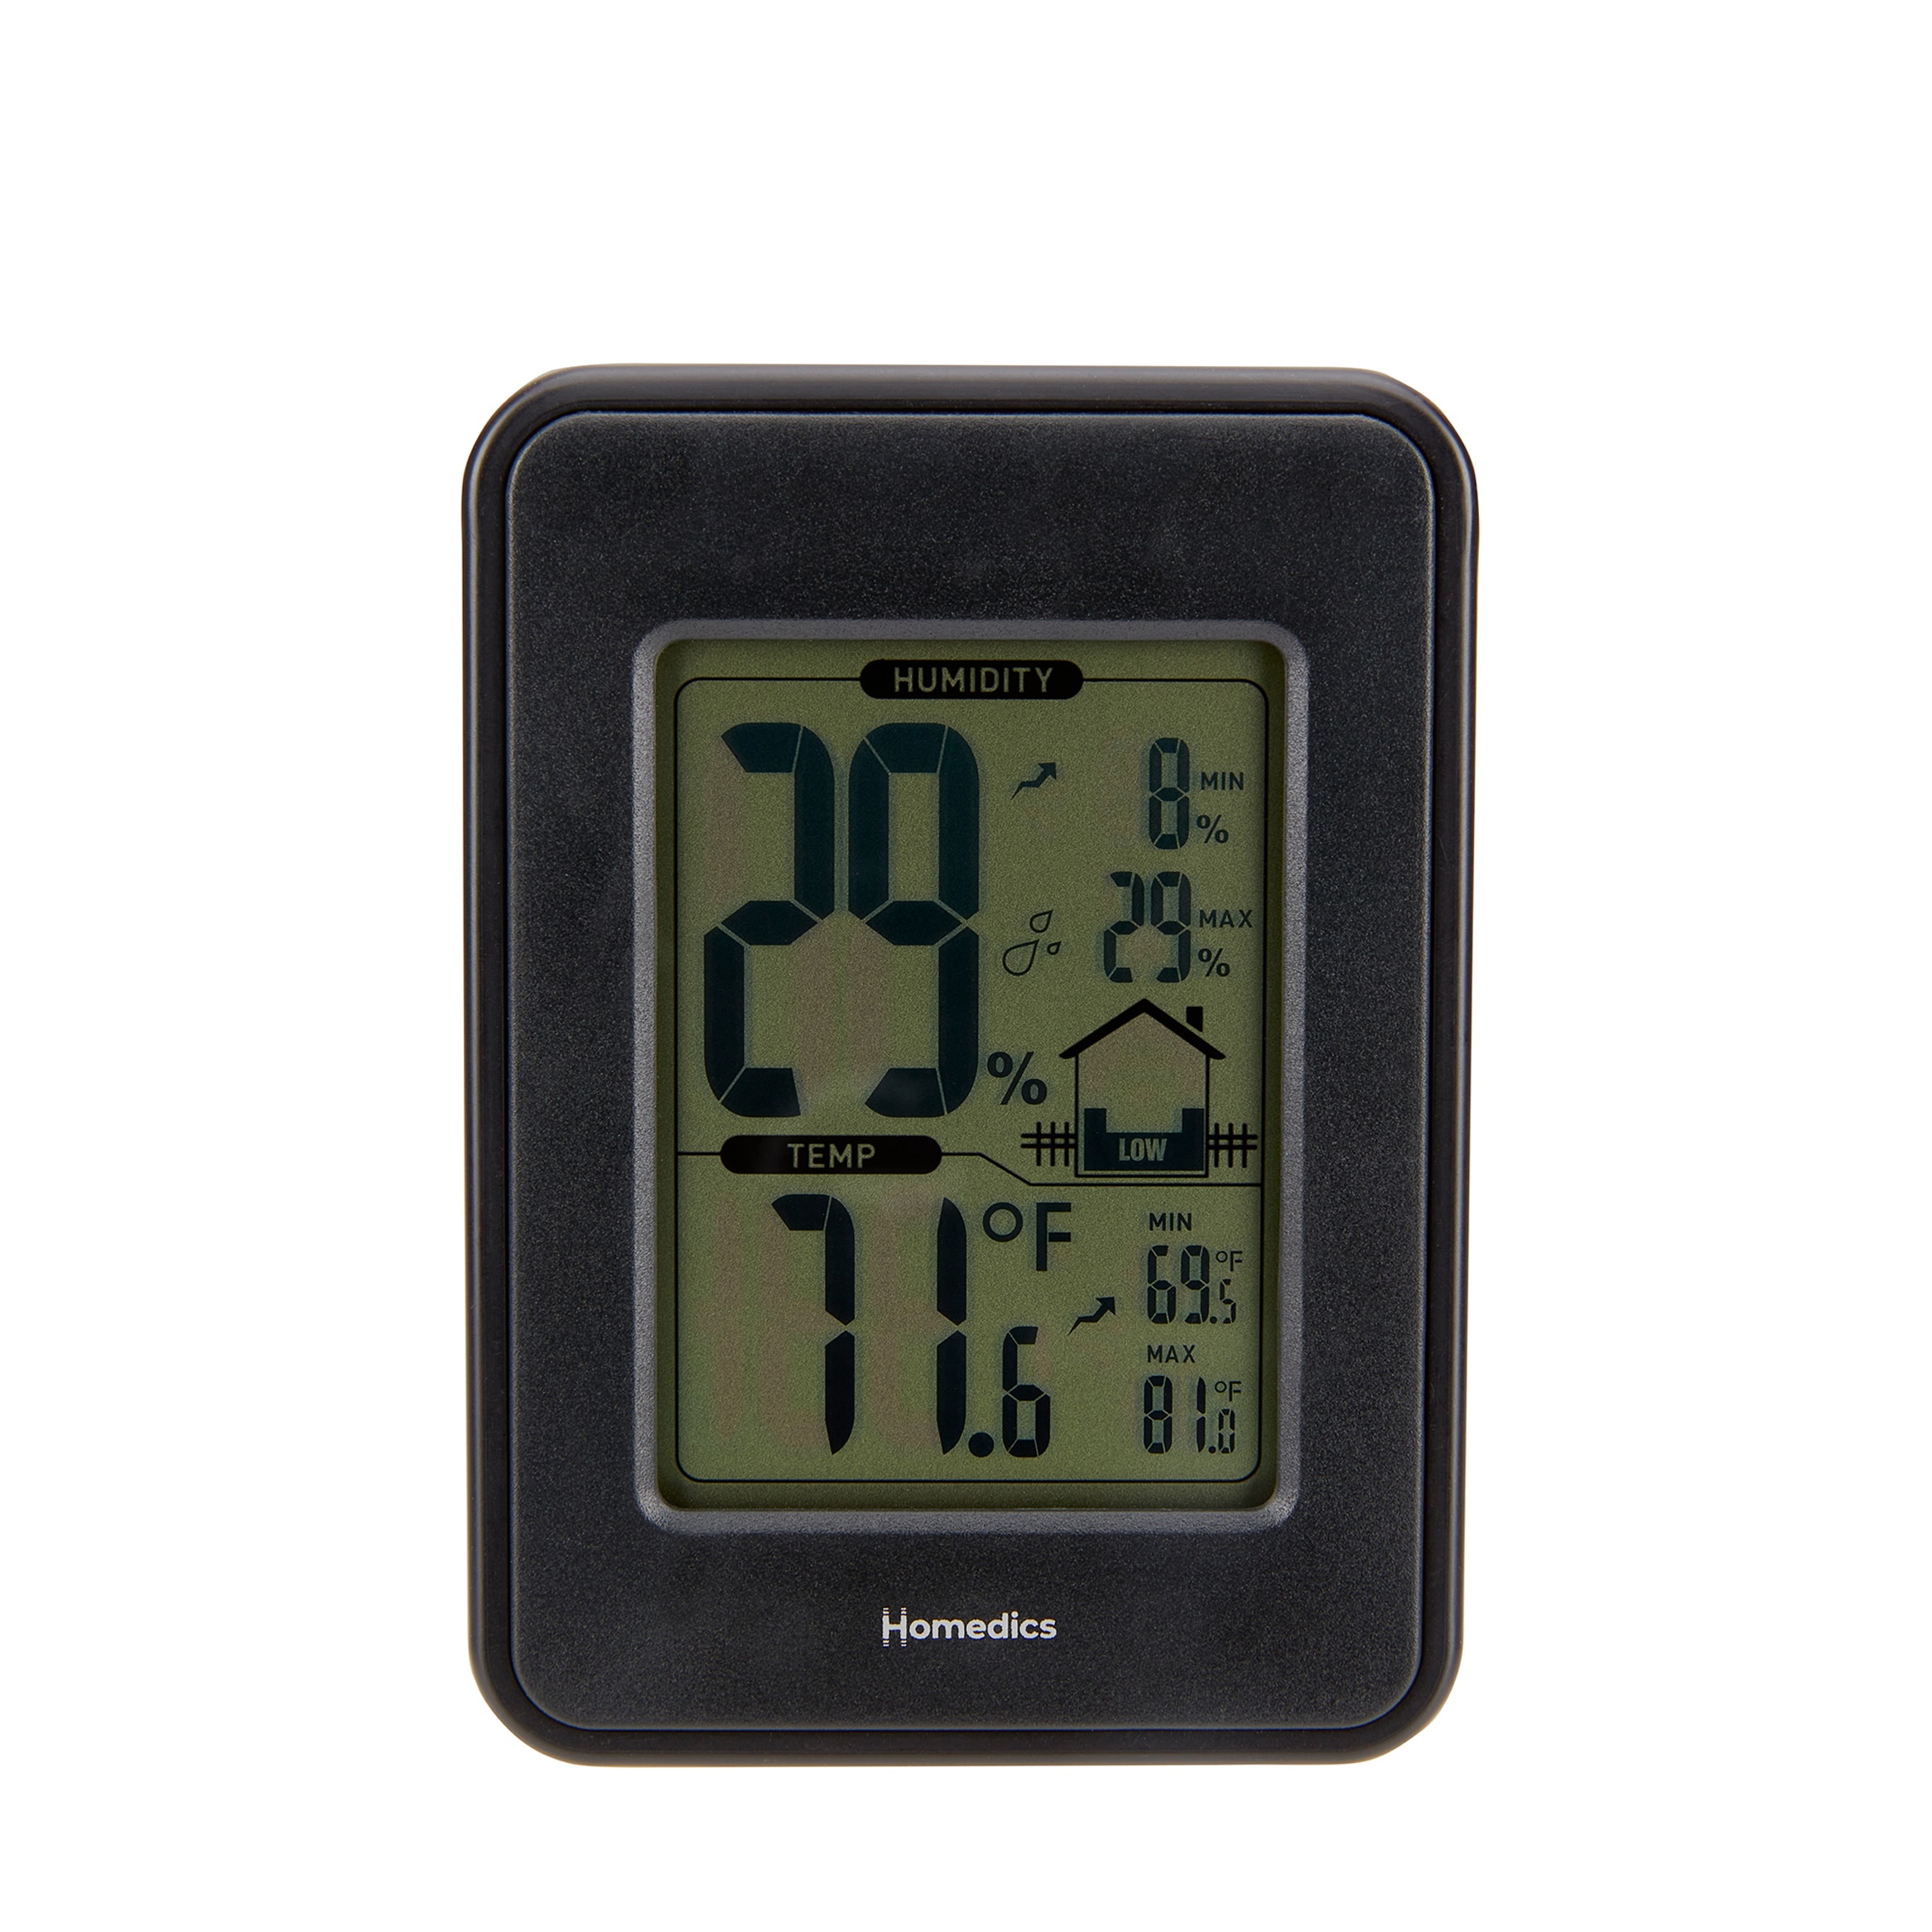 Premium Photo  Thermometer and hygrometer in hand shows the